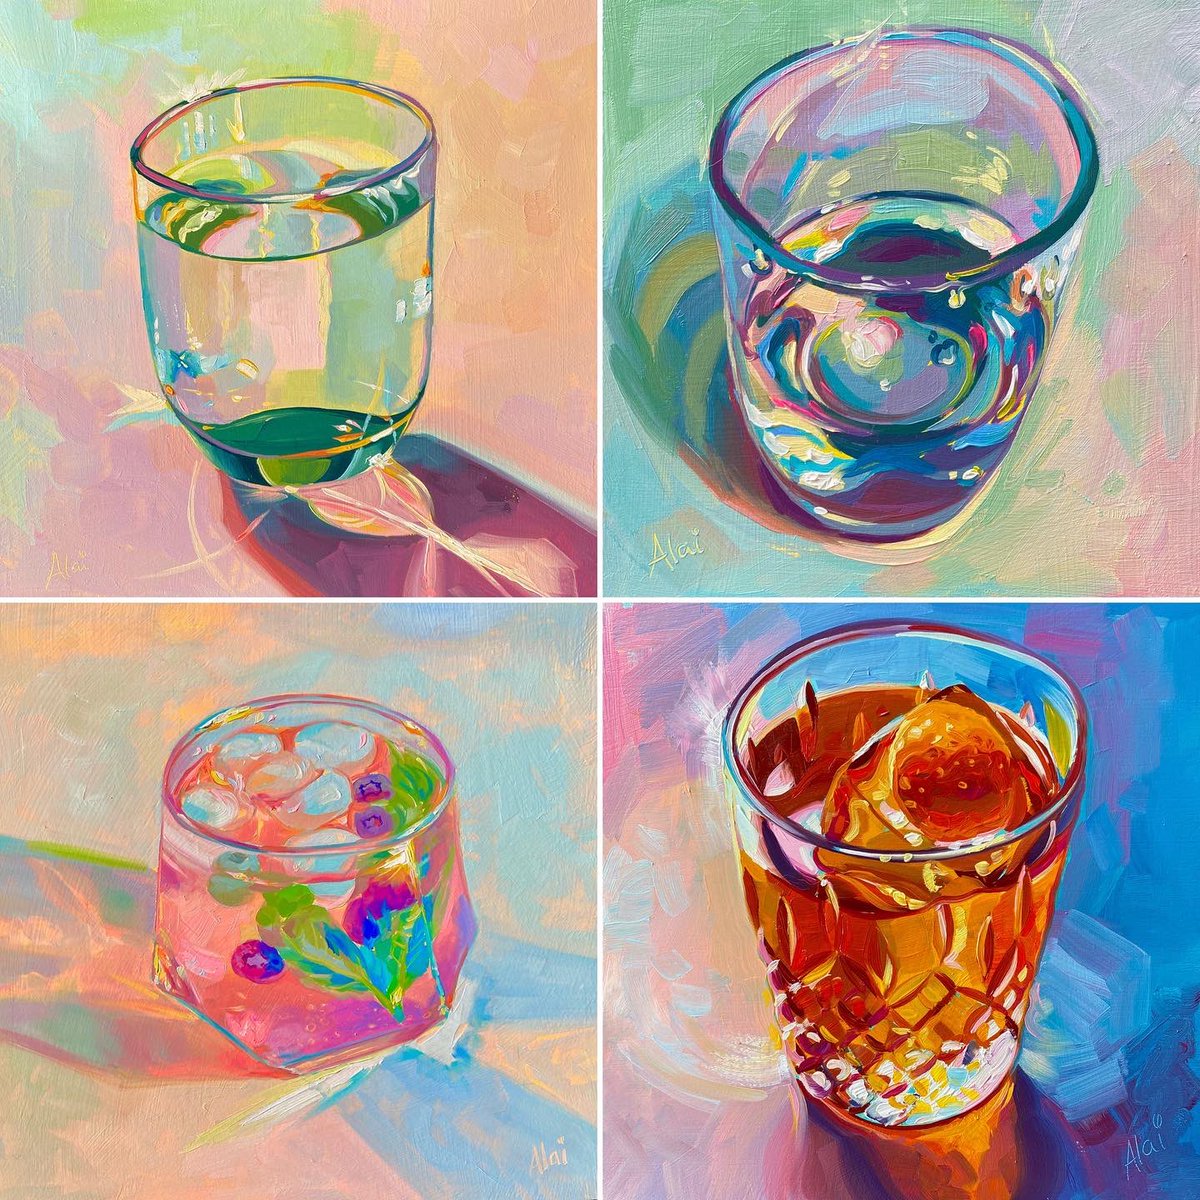 RT <a target='_blank' href='http://twitter.com/alaiganuza'>@alaiganuza</a>: Four colourful glasses. Water is colourful now too! <a target='_blank' href='http://search.twitter.com/search?q=oilpainting'><a target='_blank' href='https://twitter.com/hashtag/oilpainting?src=hash'>#oilpainting</a></a>  <a target='_blank' href='http://search.twitter.com/search?q=aesthetic'><a target='_blank' href='https://twitter.com/hashtag/aesthetic?src=hash'>#aesthetic</a></a> <a target='_blank' href='https://t.co/CfCwNUZFJa'>https://t.co/CfCwNUZFJa</a>